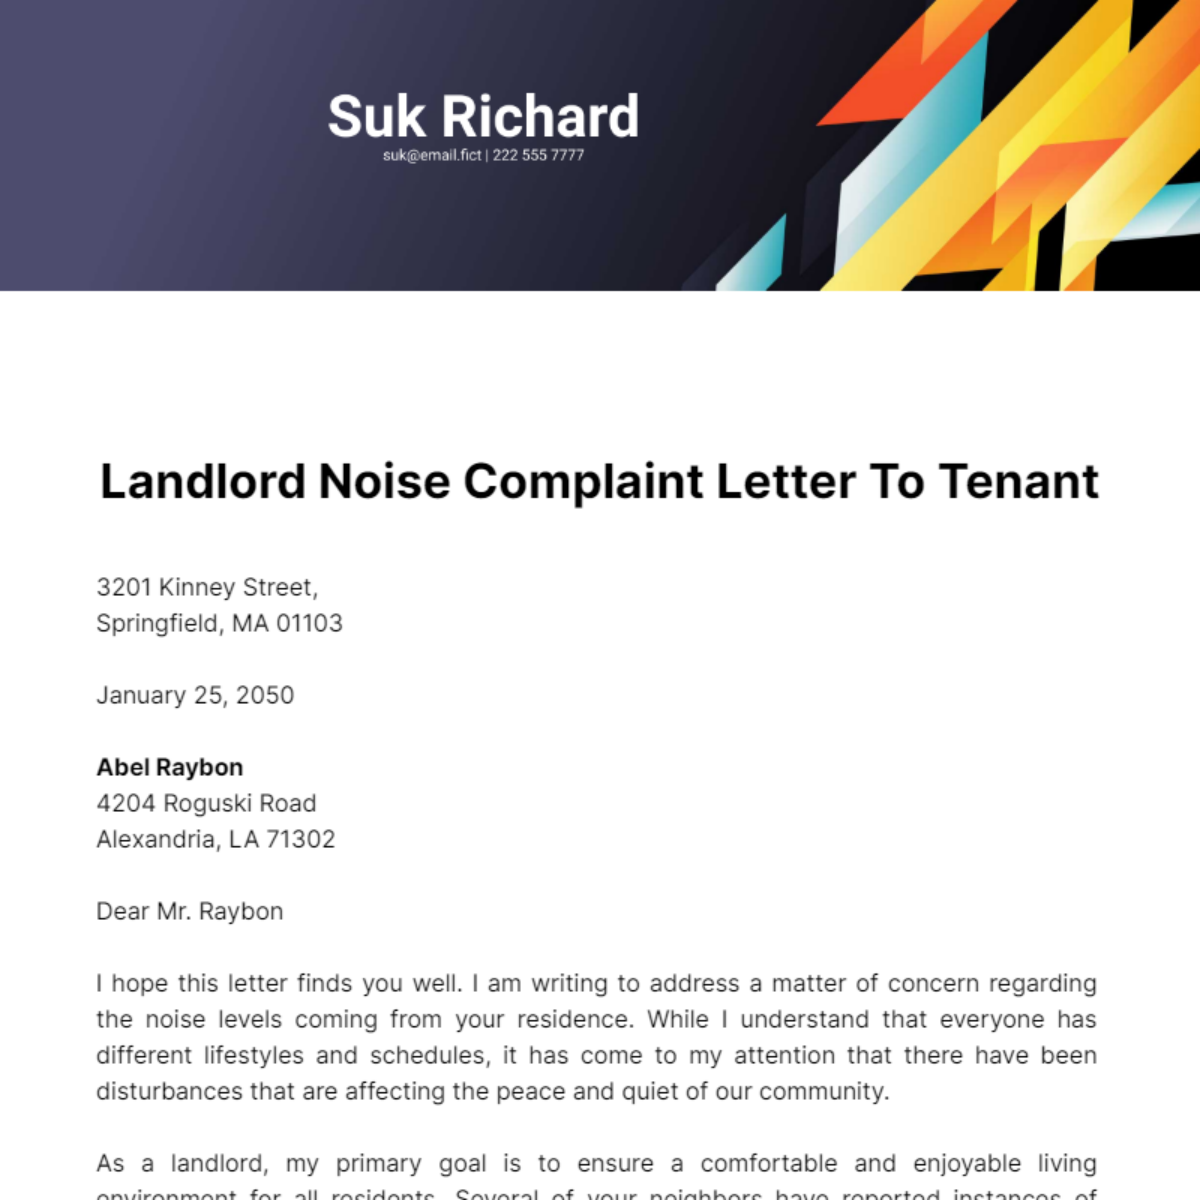 Landlord Noise Complaint Letter to Tenant Template